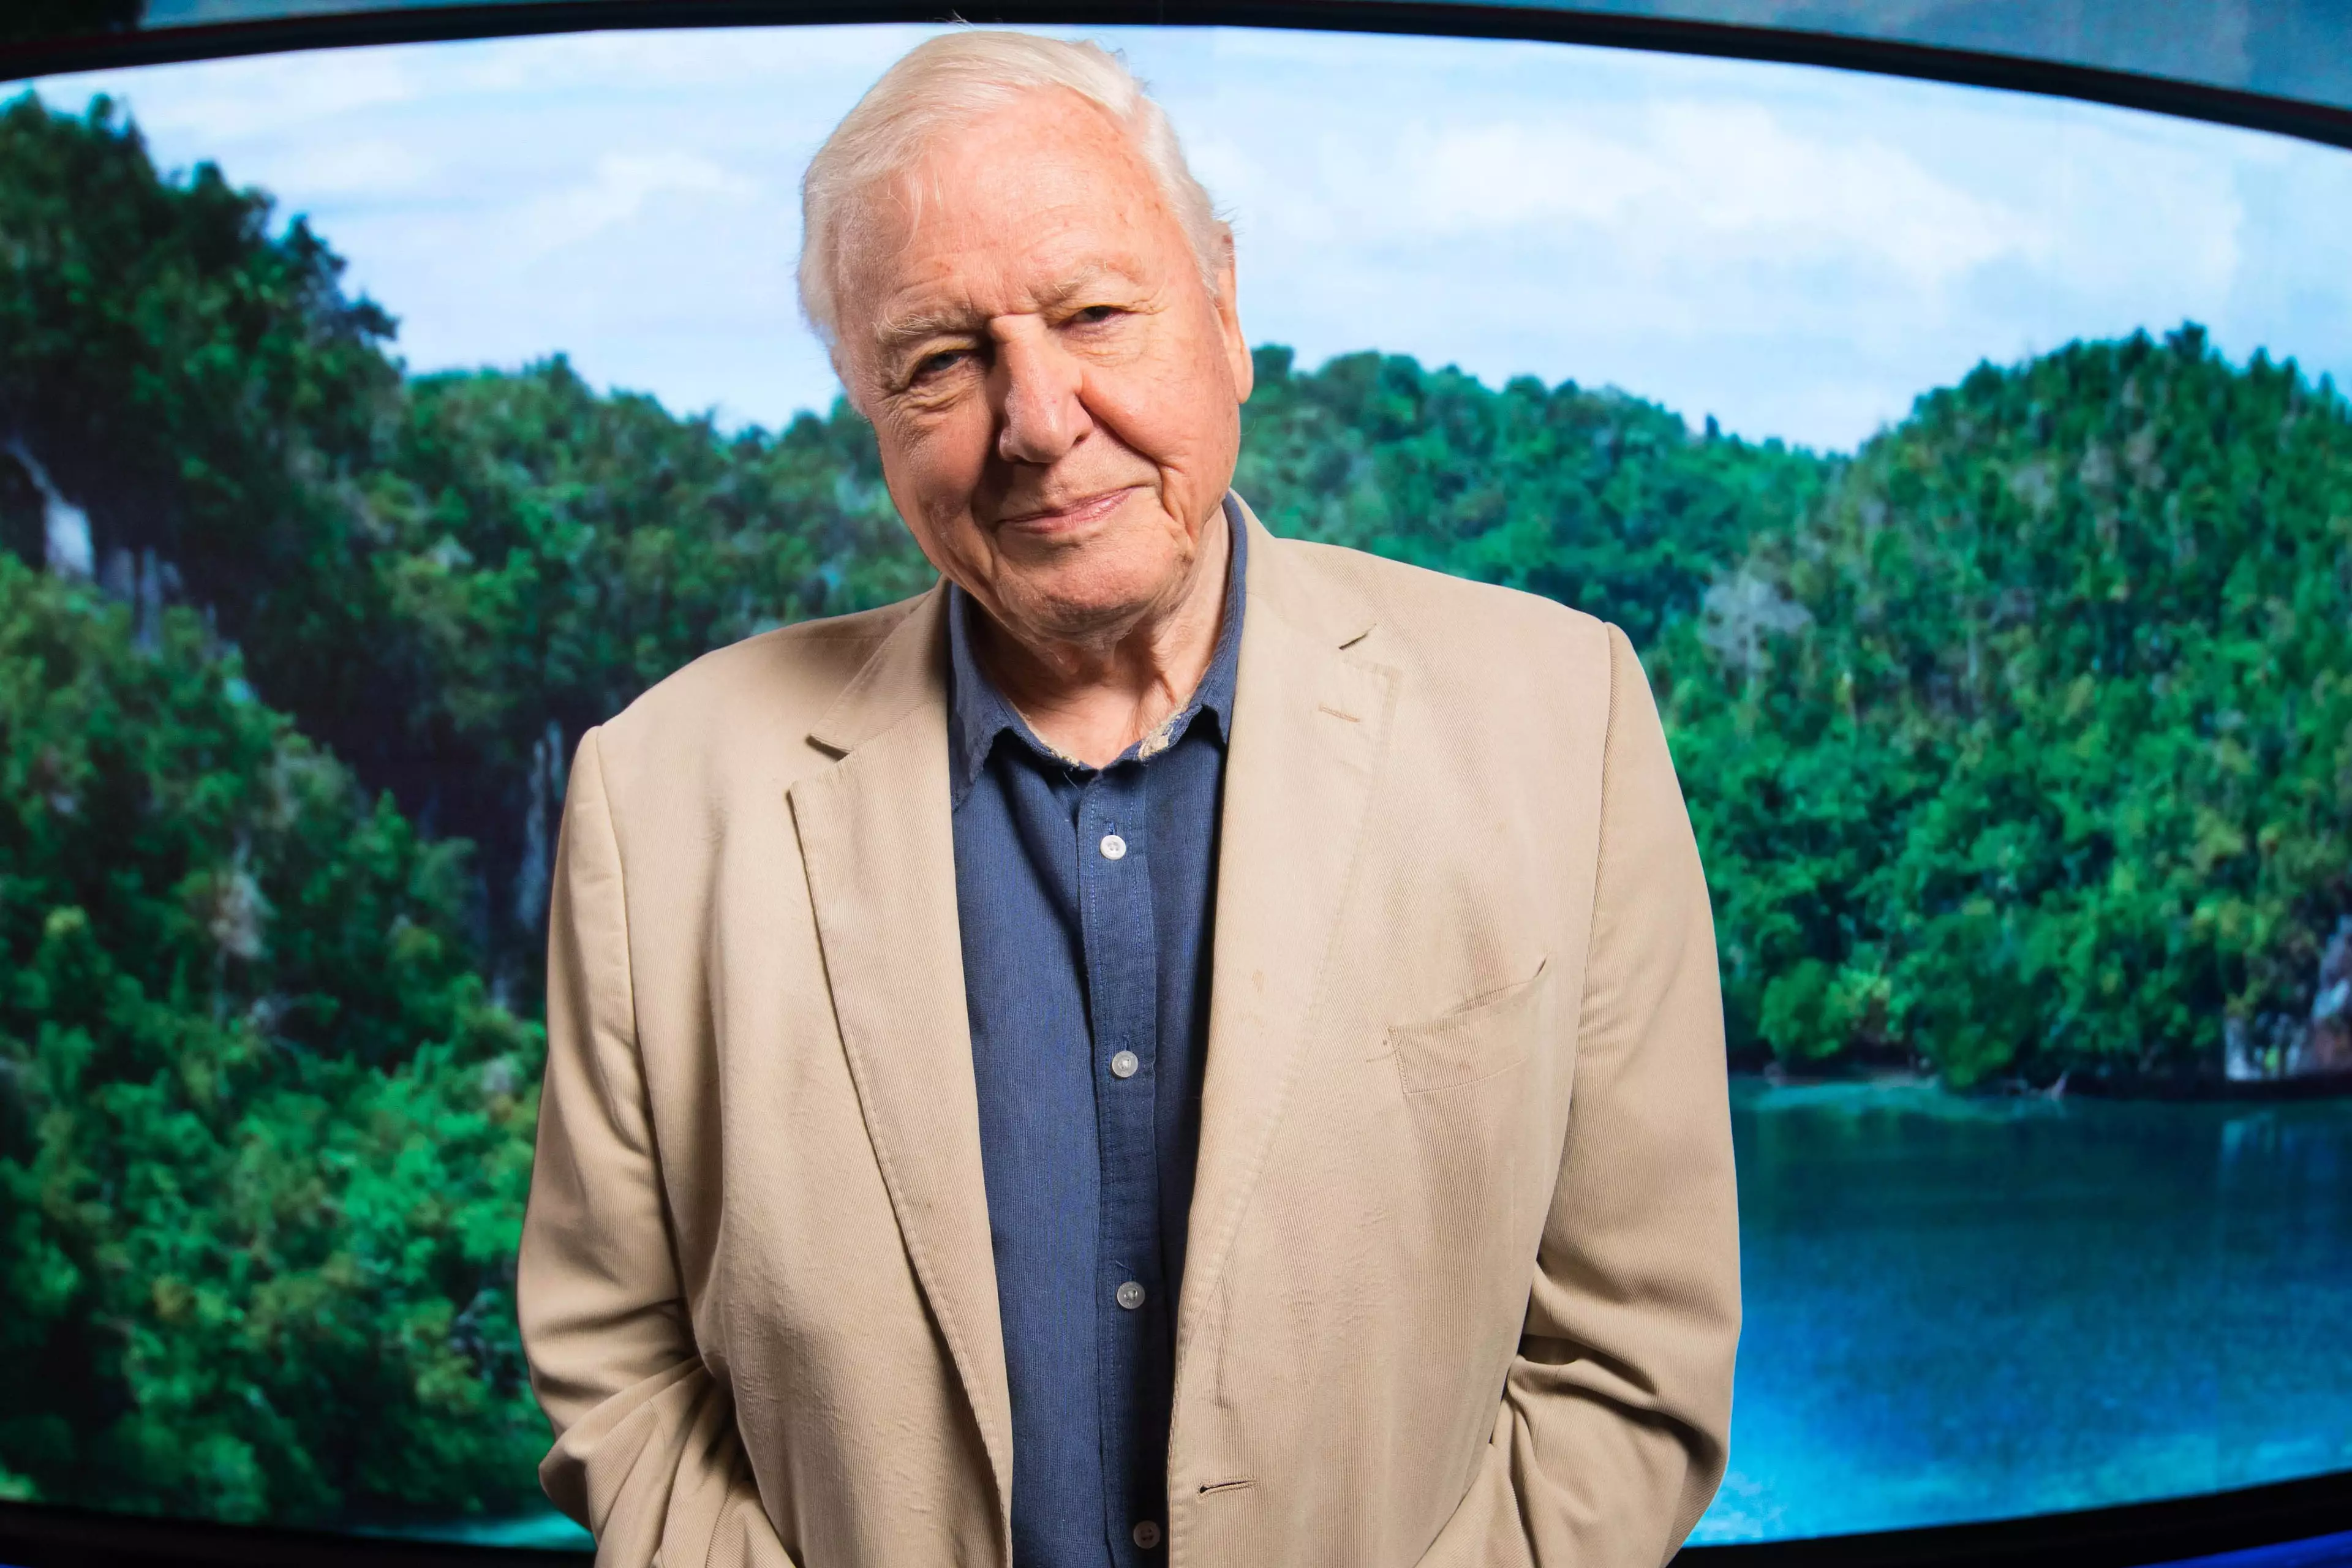 David Attenborough turns 95 this year and he still doesn't have a driving licence '